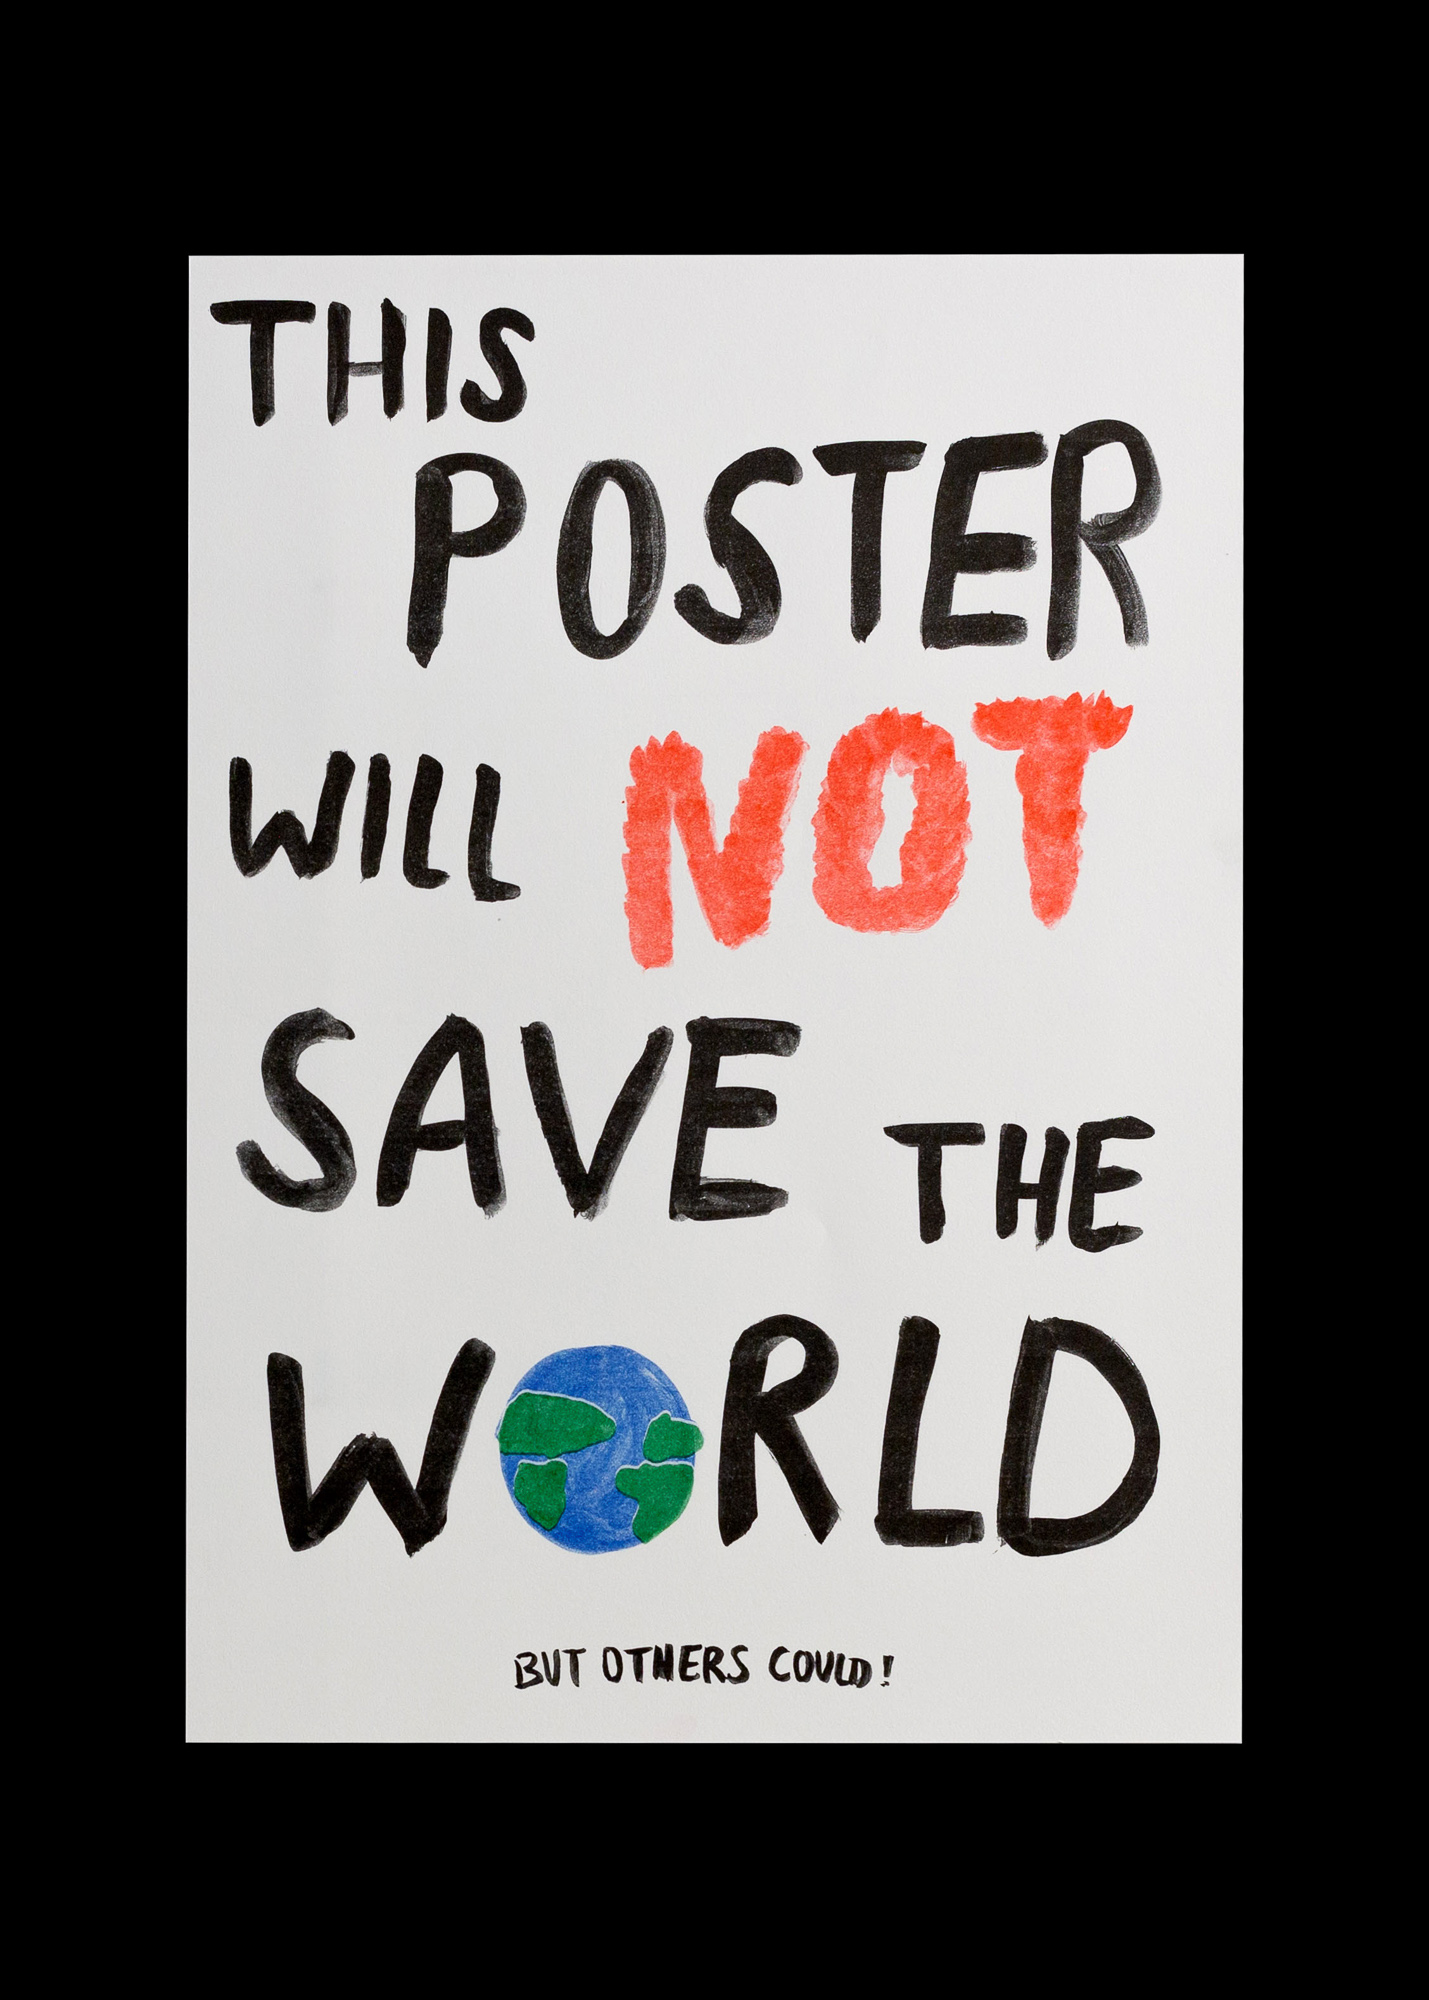 Post — The Poster Exhibition